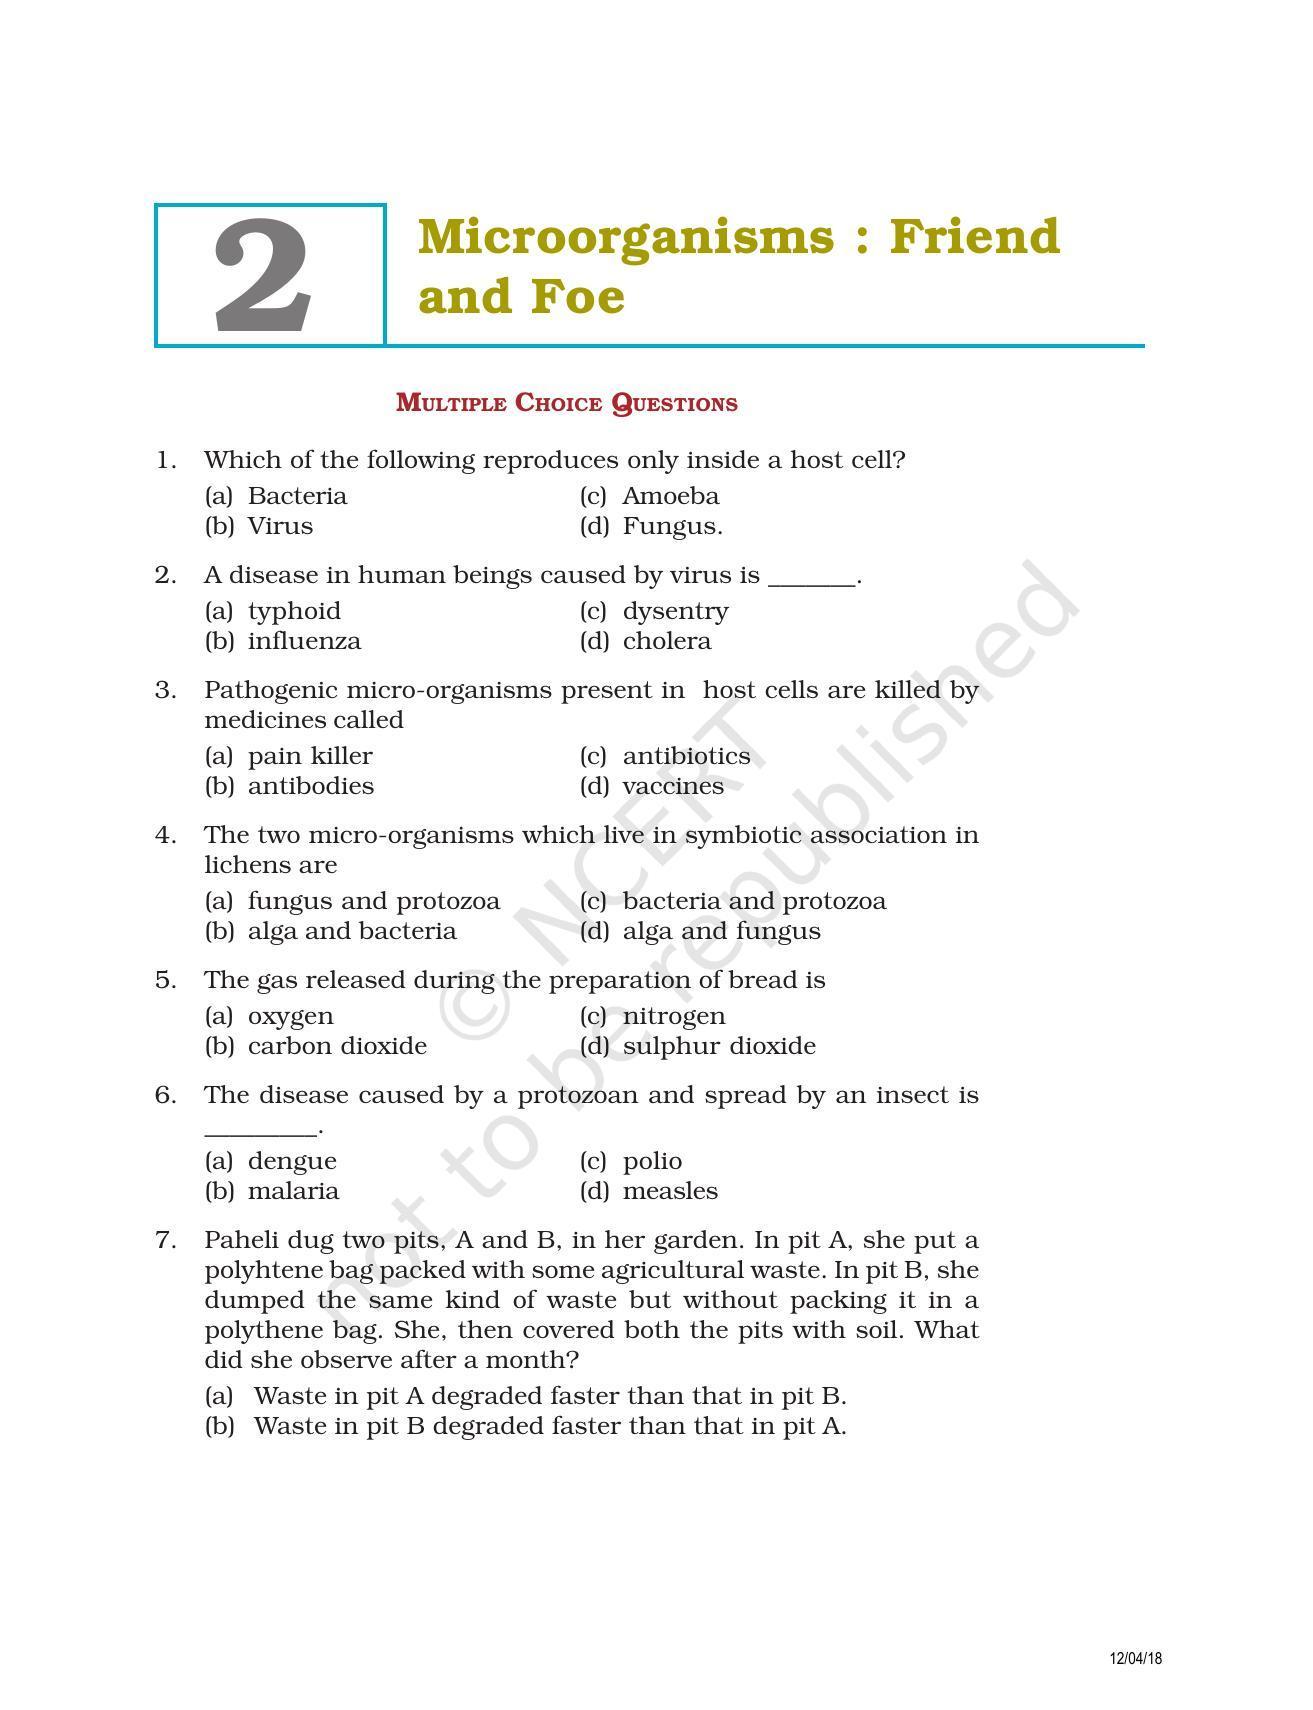 NCERT Exemplar Book for Class 8 Science: Chapter 2- Microorganisms : Friend and Foe - Page 1